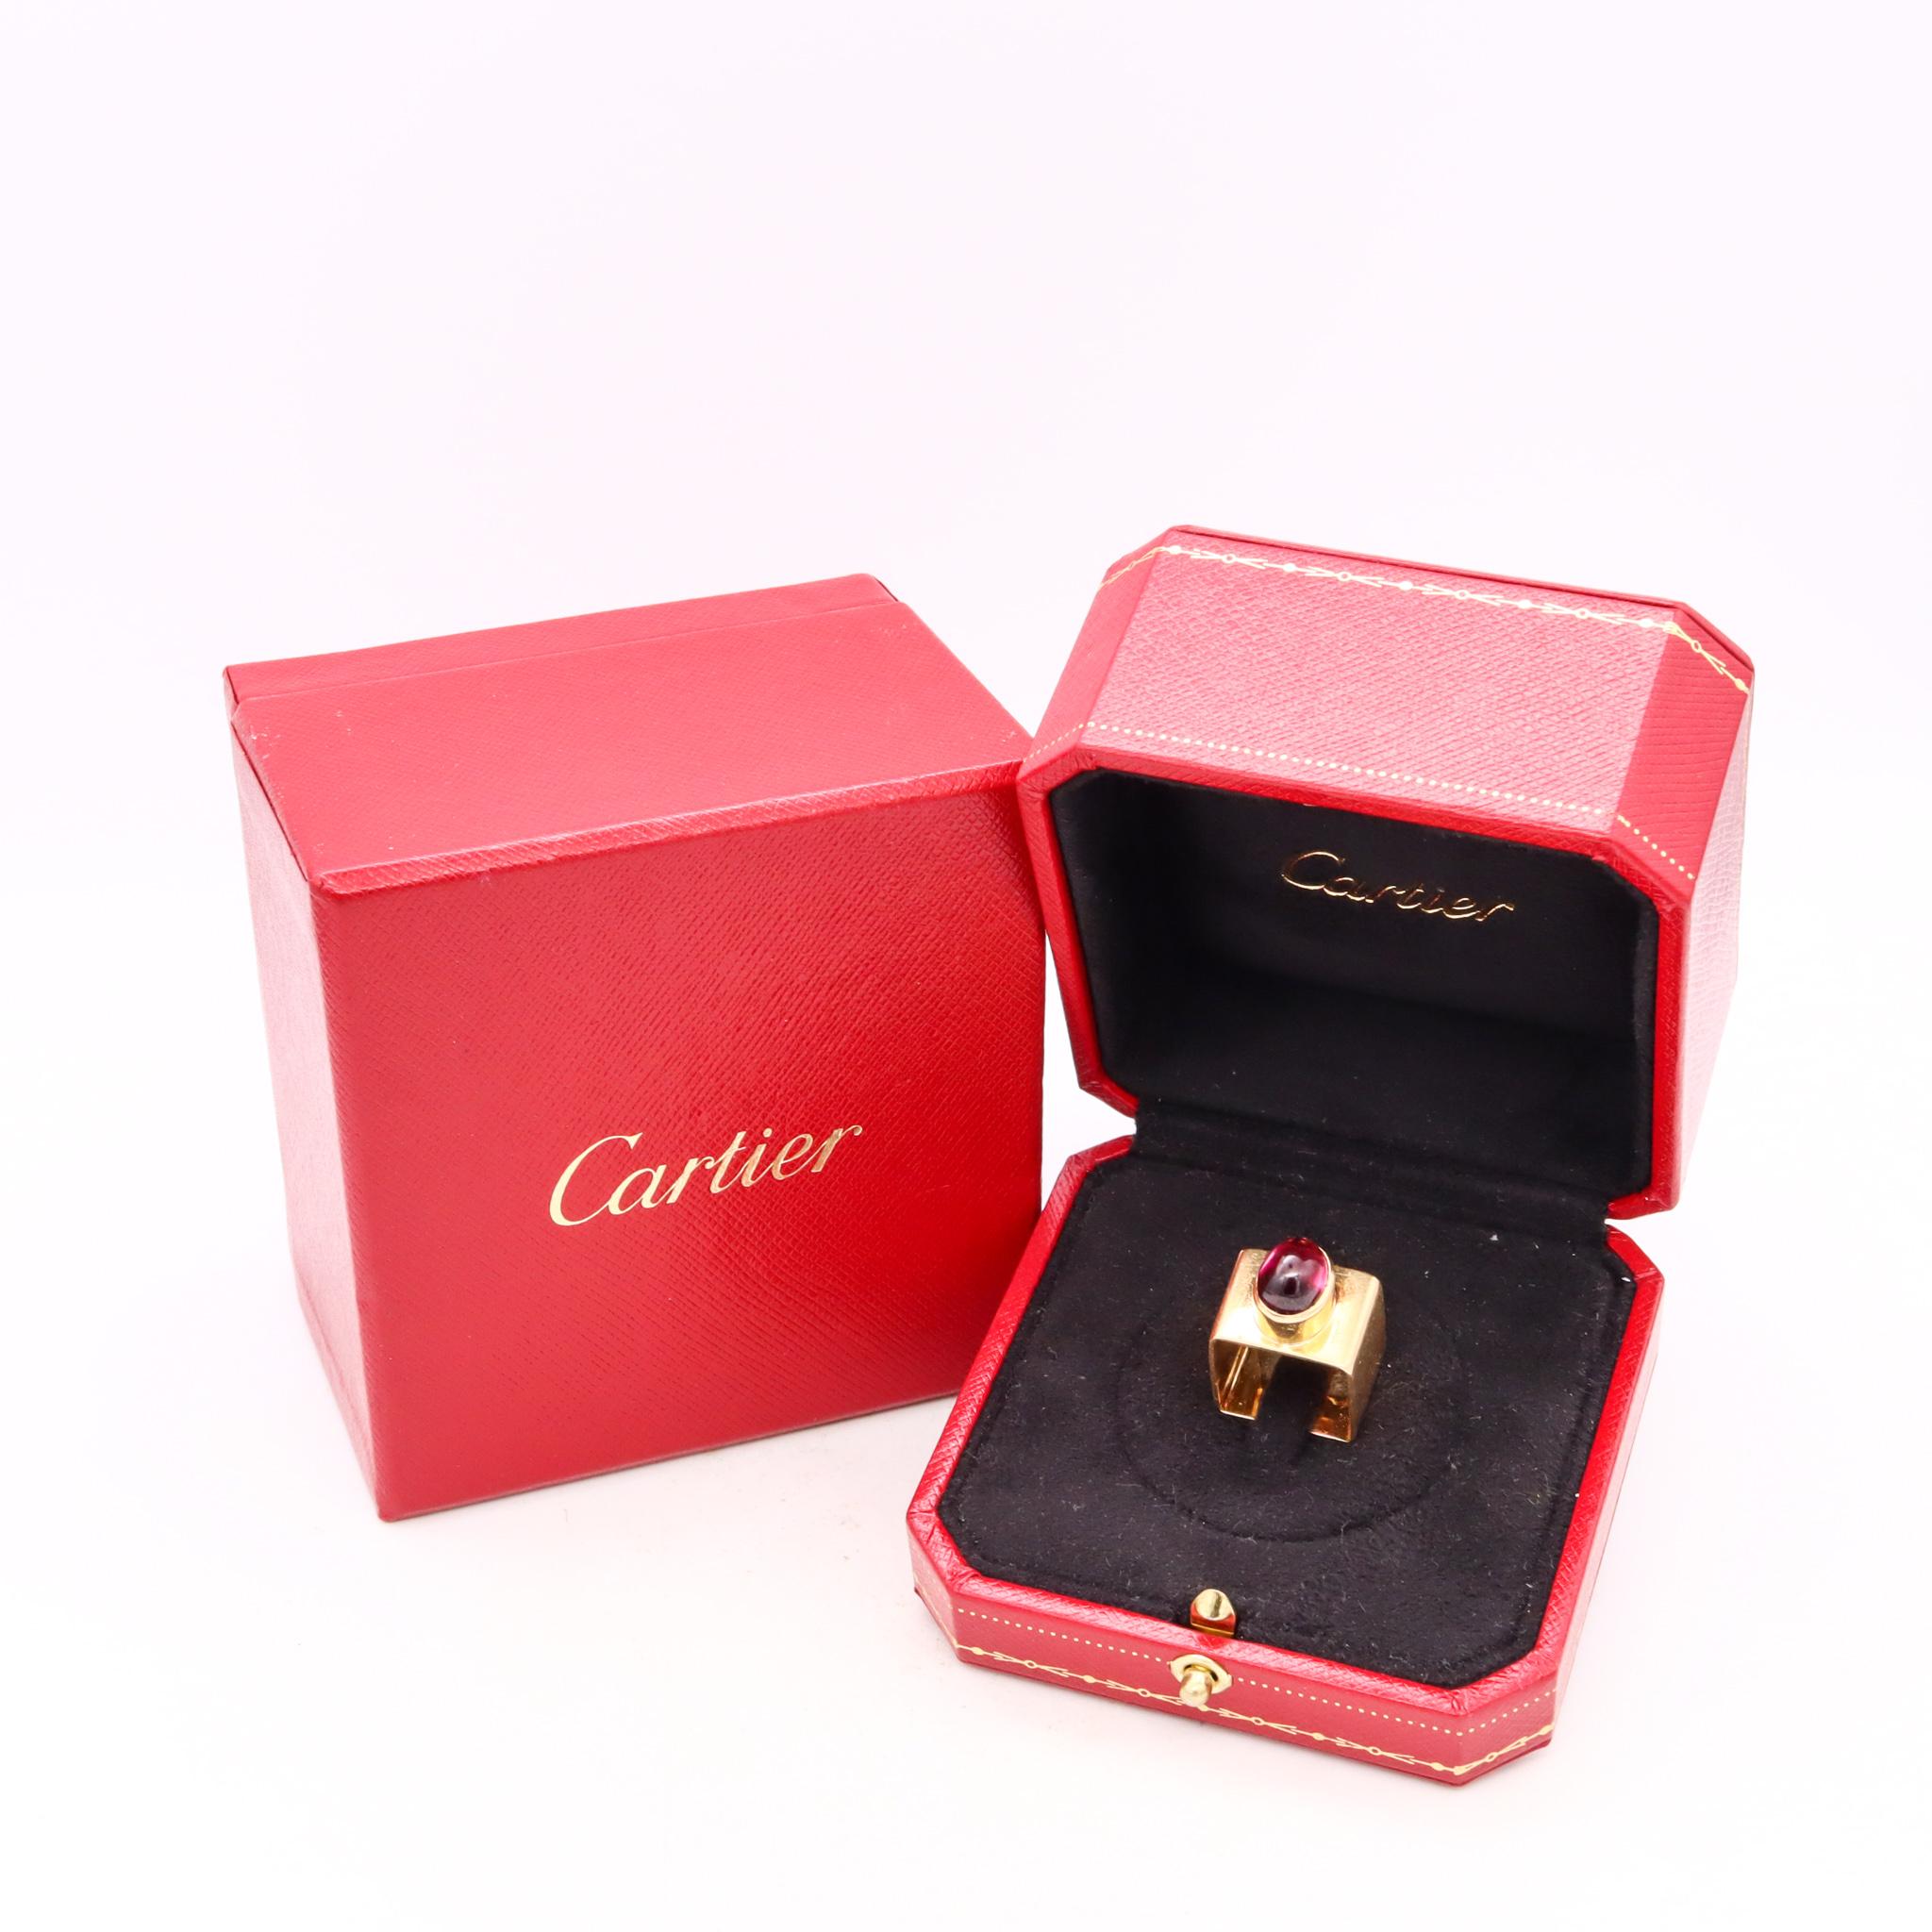 Cartier 1968 Paris Dinh Van 18Kt Gold Geometric Ring 3.27 Cts Red Tourmaline For Sale 1